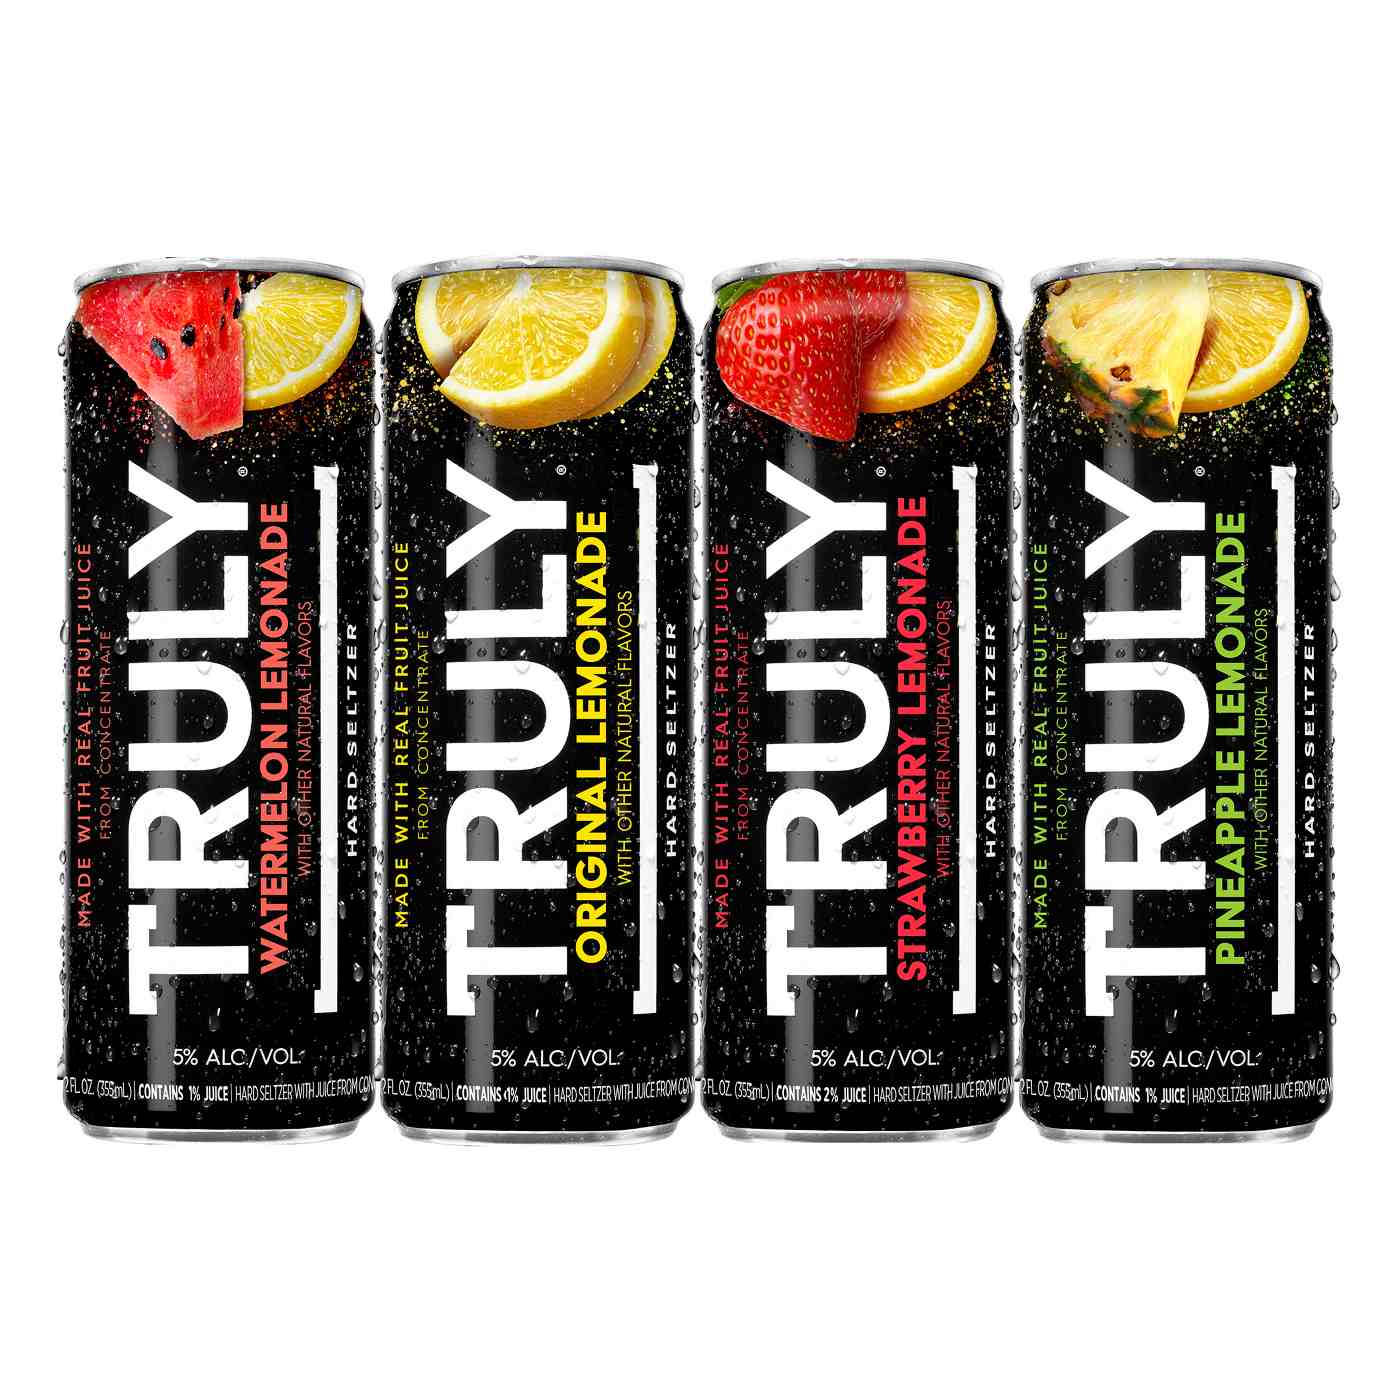 Truly Hard Seltzer Lemonade Variety Pack 12 pk Cans; image 2 of 4